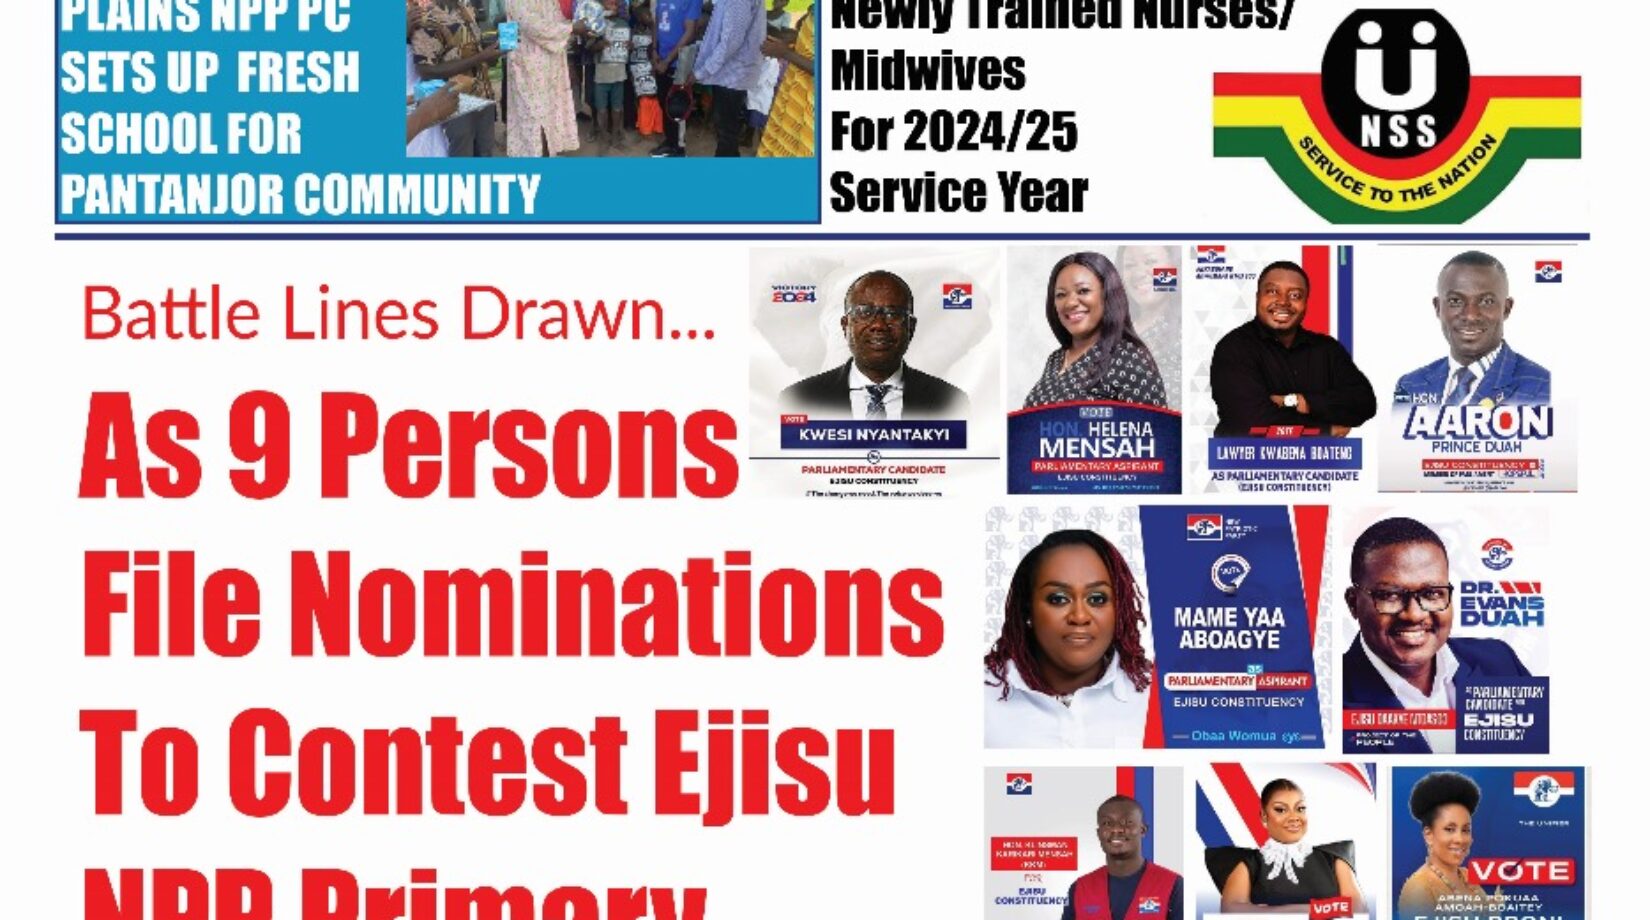 The New Trust Newspaper, Friday,5th April,2024 Edition